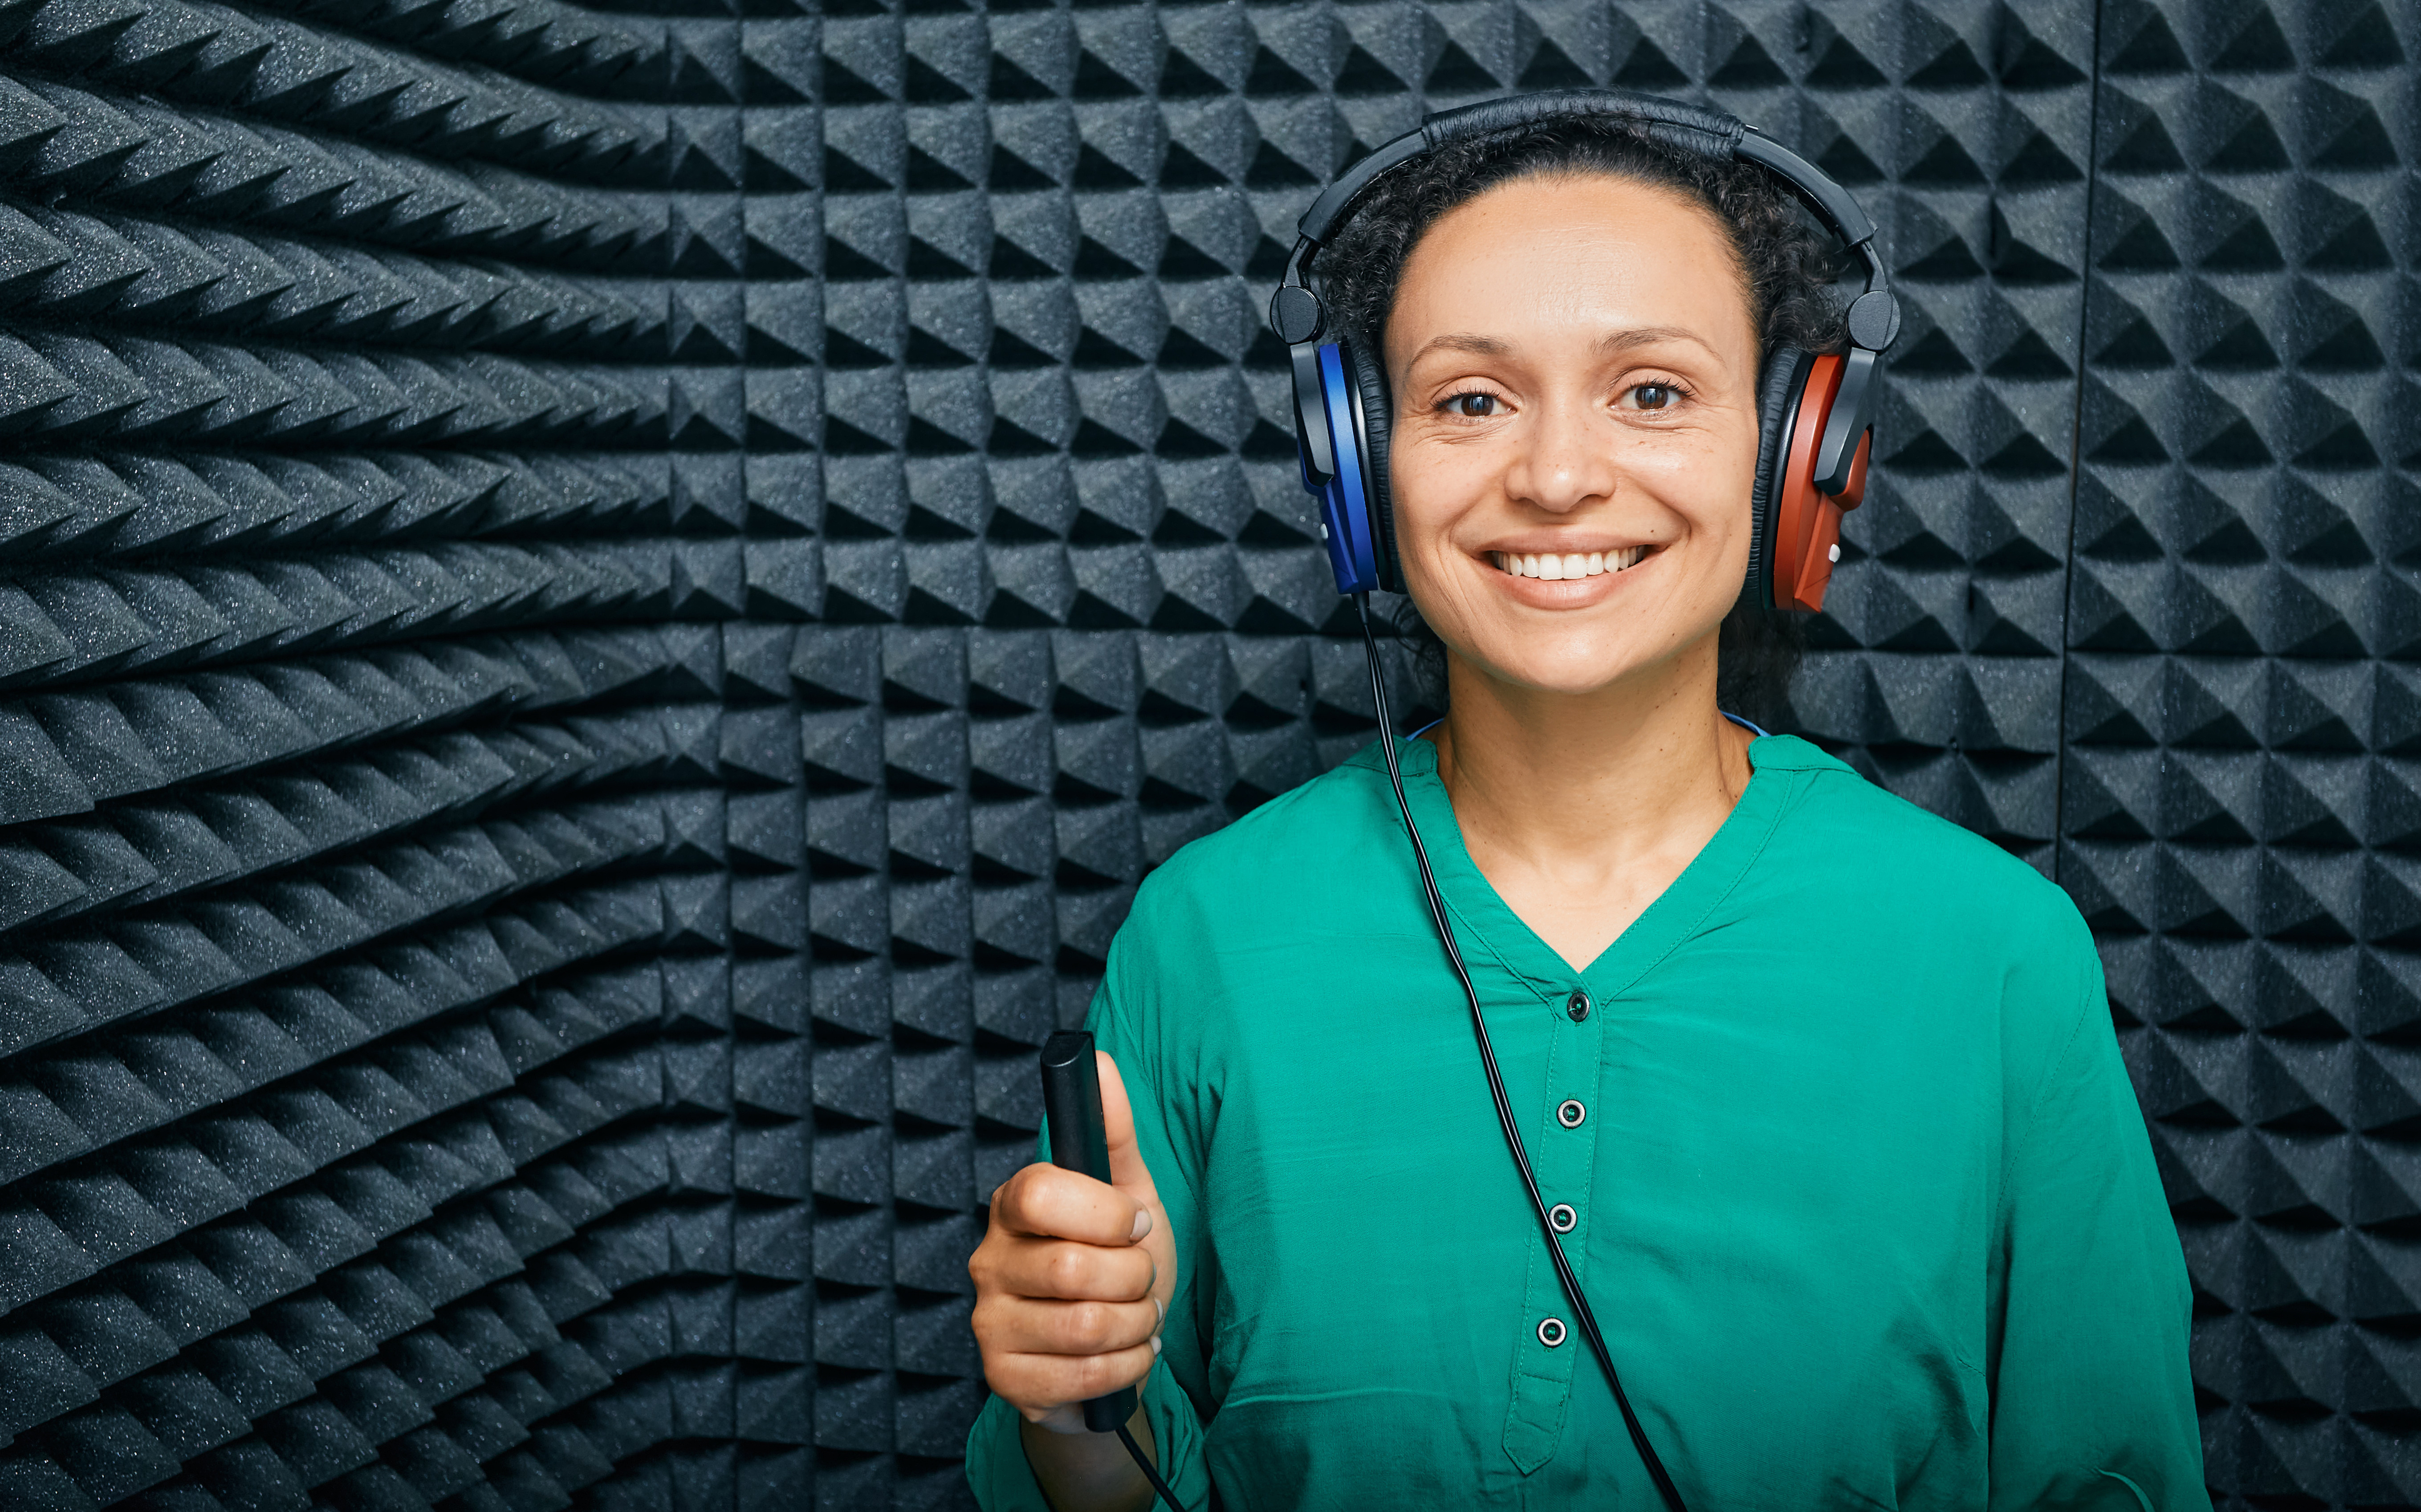 Occupational Medicine Hearing Tests: What is an Audiogram?